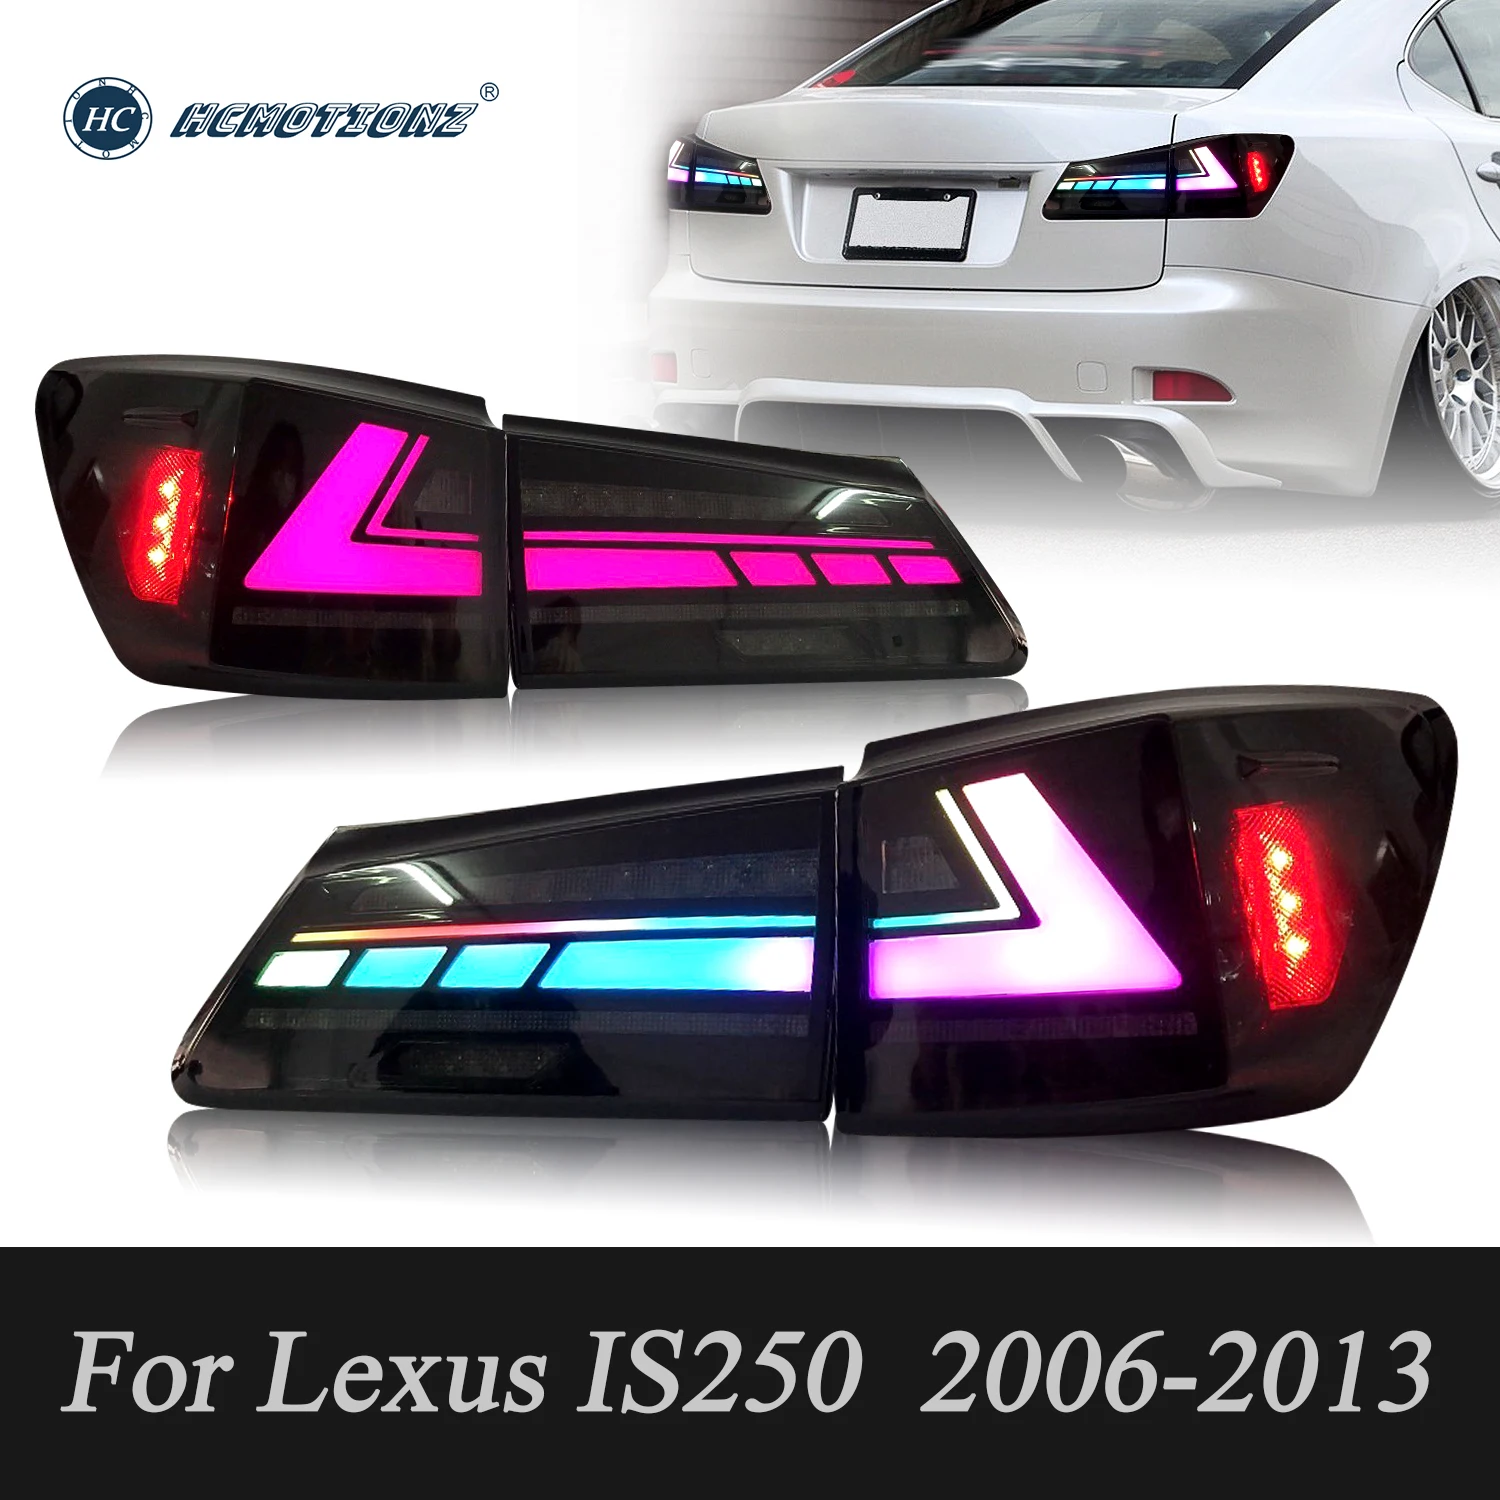 

HCMOTIONZ RGB LED Tail Lights for Lexus IS250 IS350 ISF 220d 2006-2013 DRL Car Rear Lamps Assembly Auto Lights Accessories